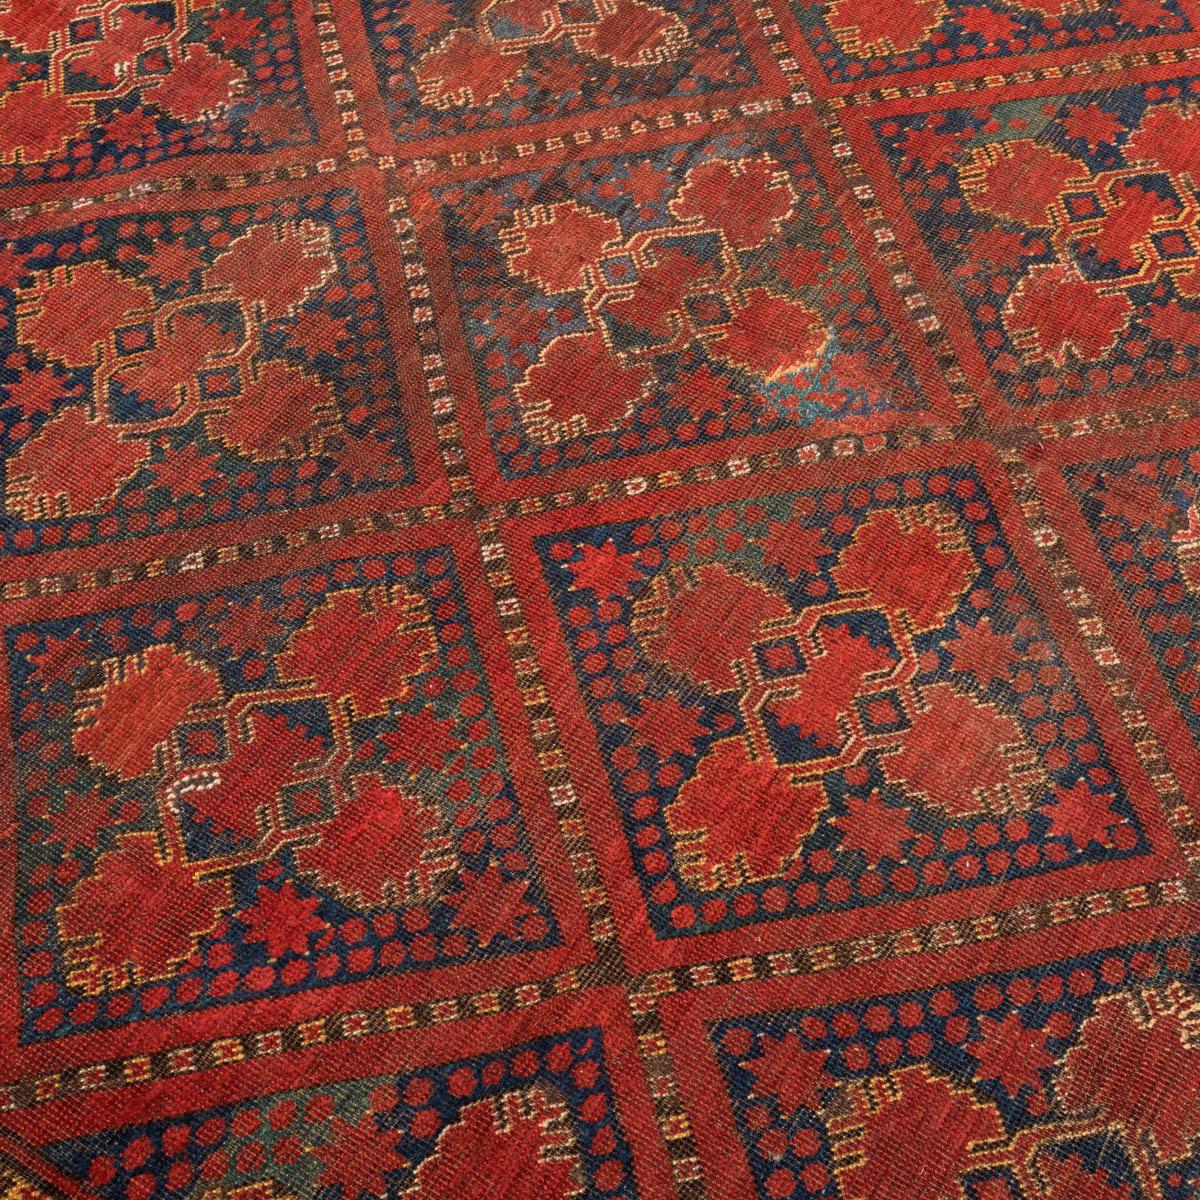 Antique Turkestan Ersari rug. Around 1900.
- This piece is characterized by the decoration of geometric elements , blue, red and green throughout the field.
- Base tones of its field in reddish.
- Very elegant and decorative piece.
- It is an ideal